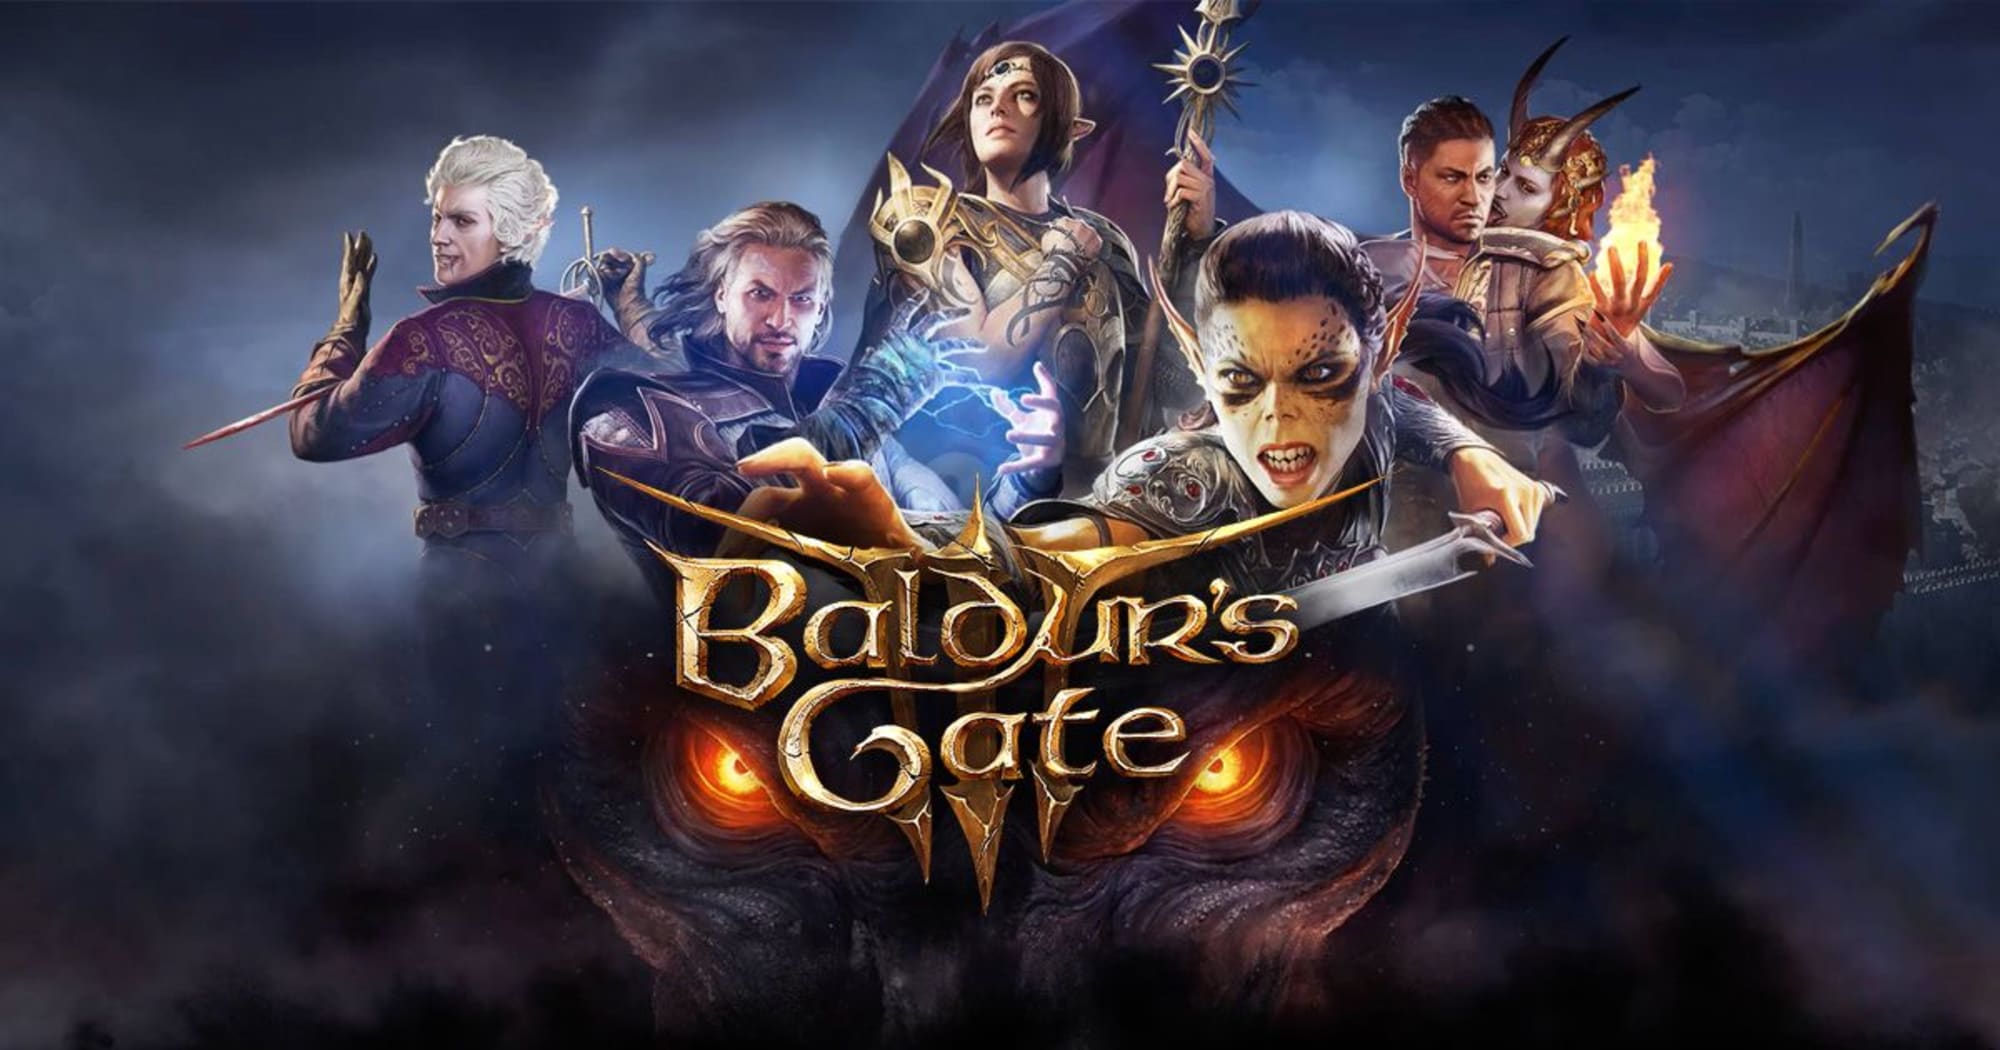 Creating the Ultimate PC for Baldur's Gate 3